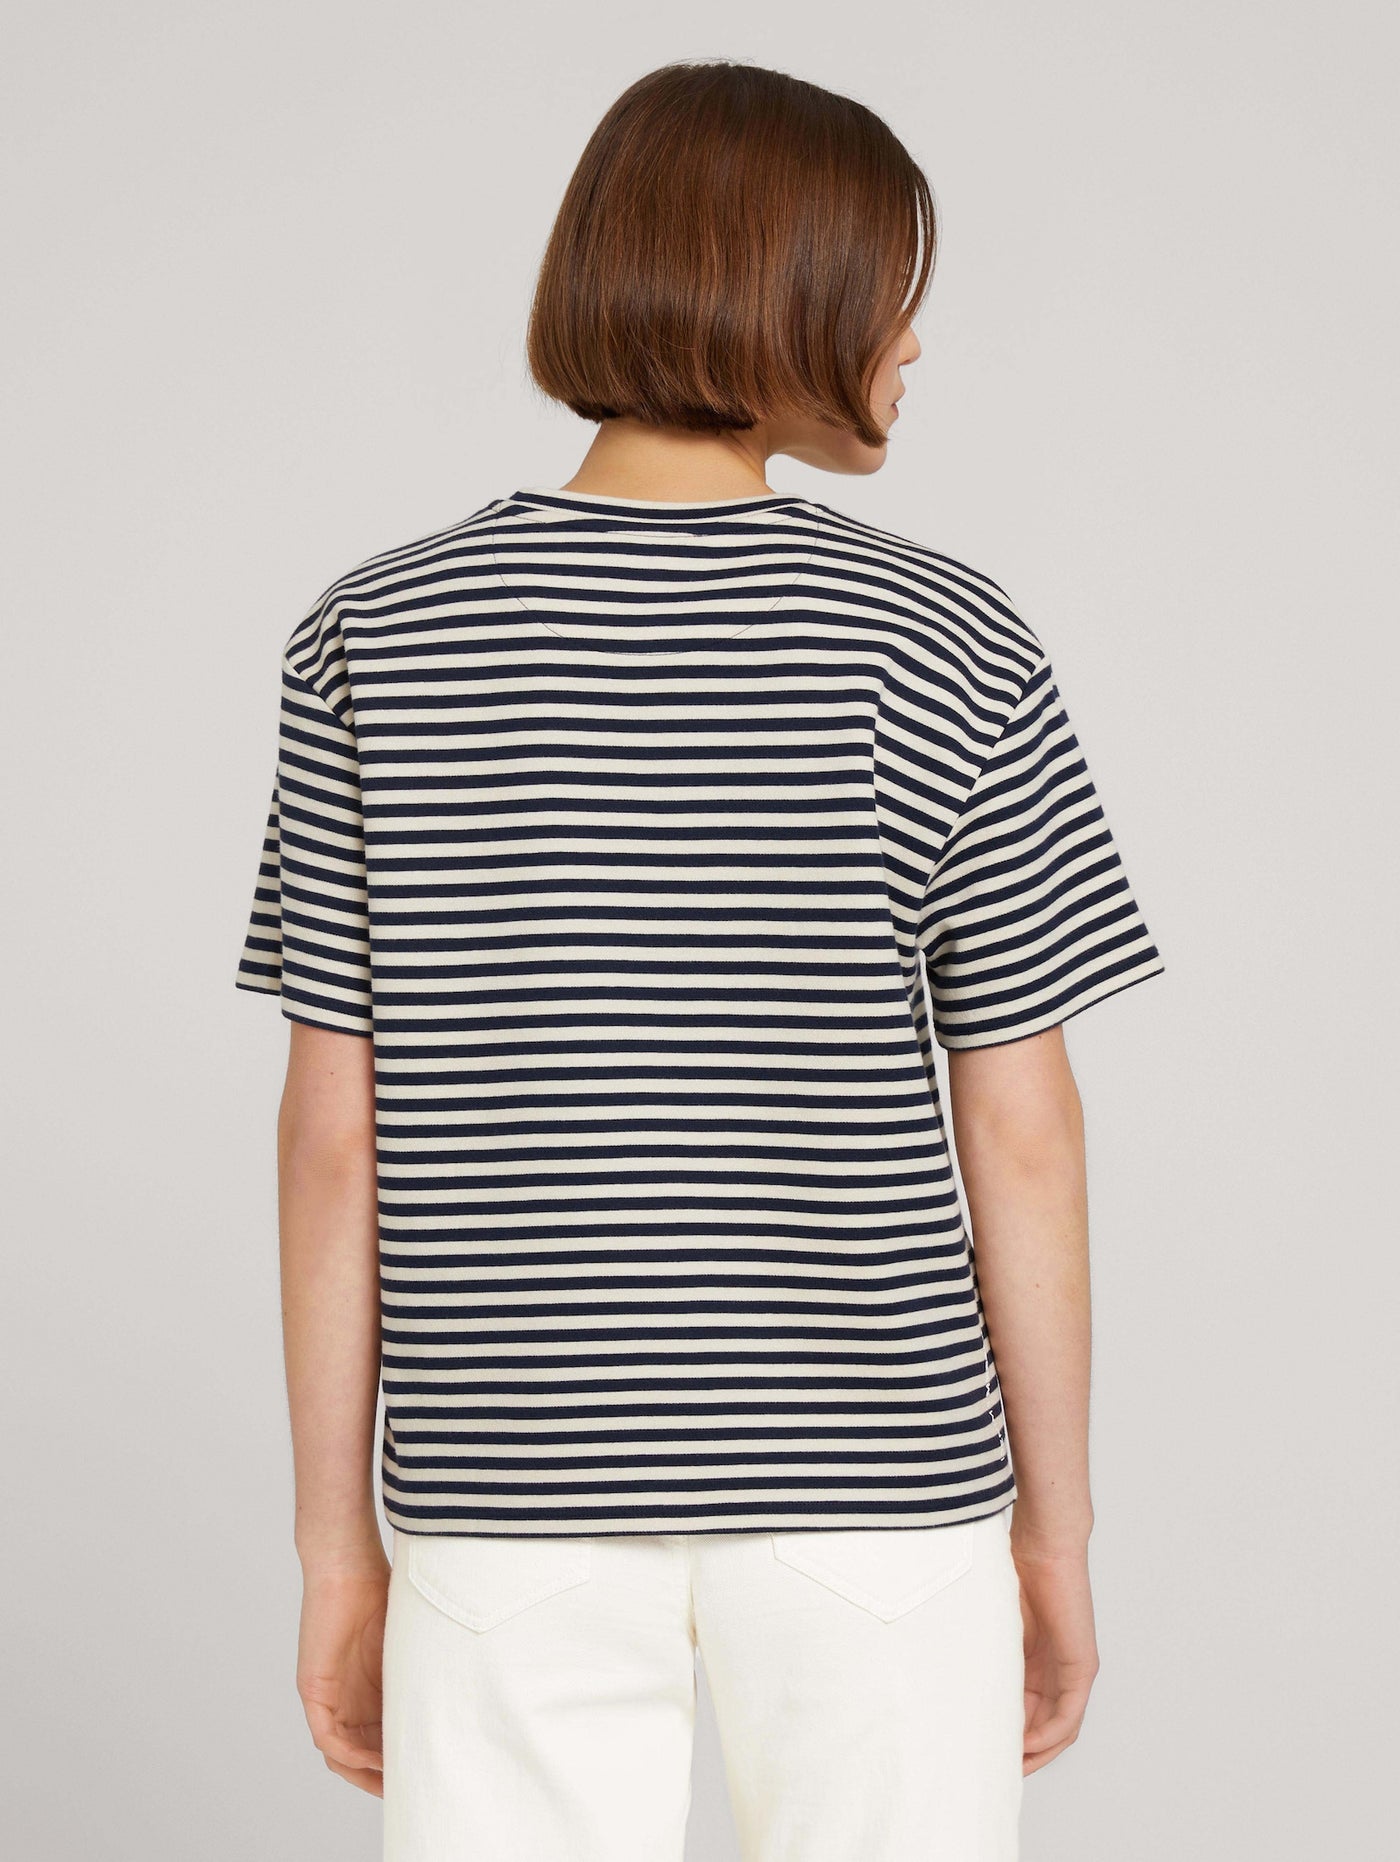 MBRC@TOMTAILOR WOMEN STRIPED T-SHIRT - BACK VIEW